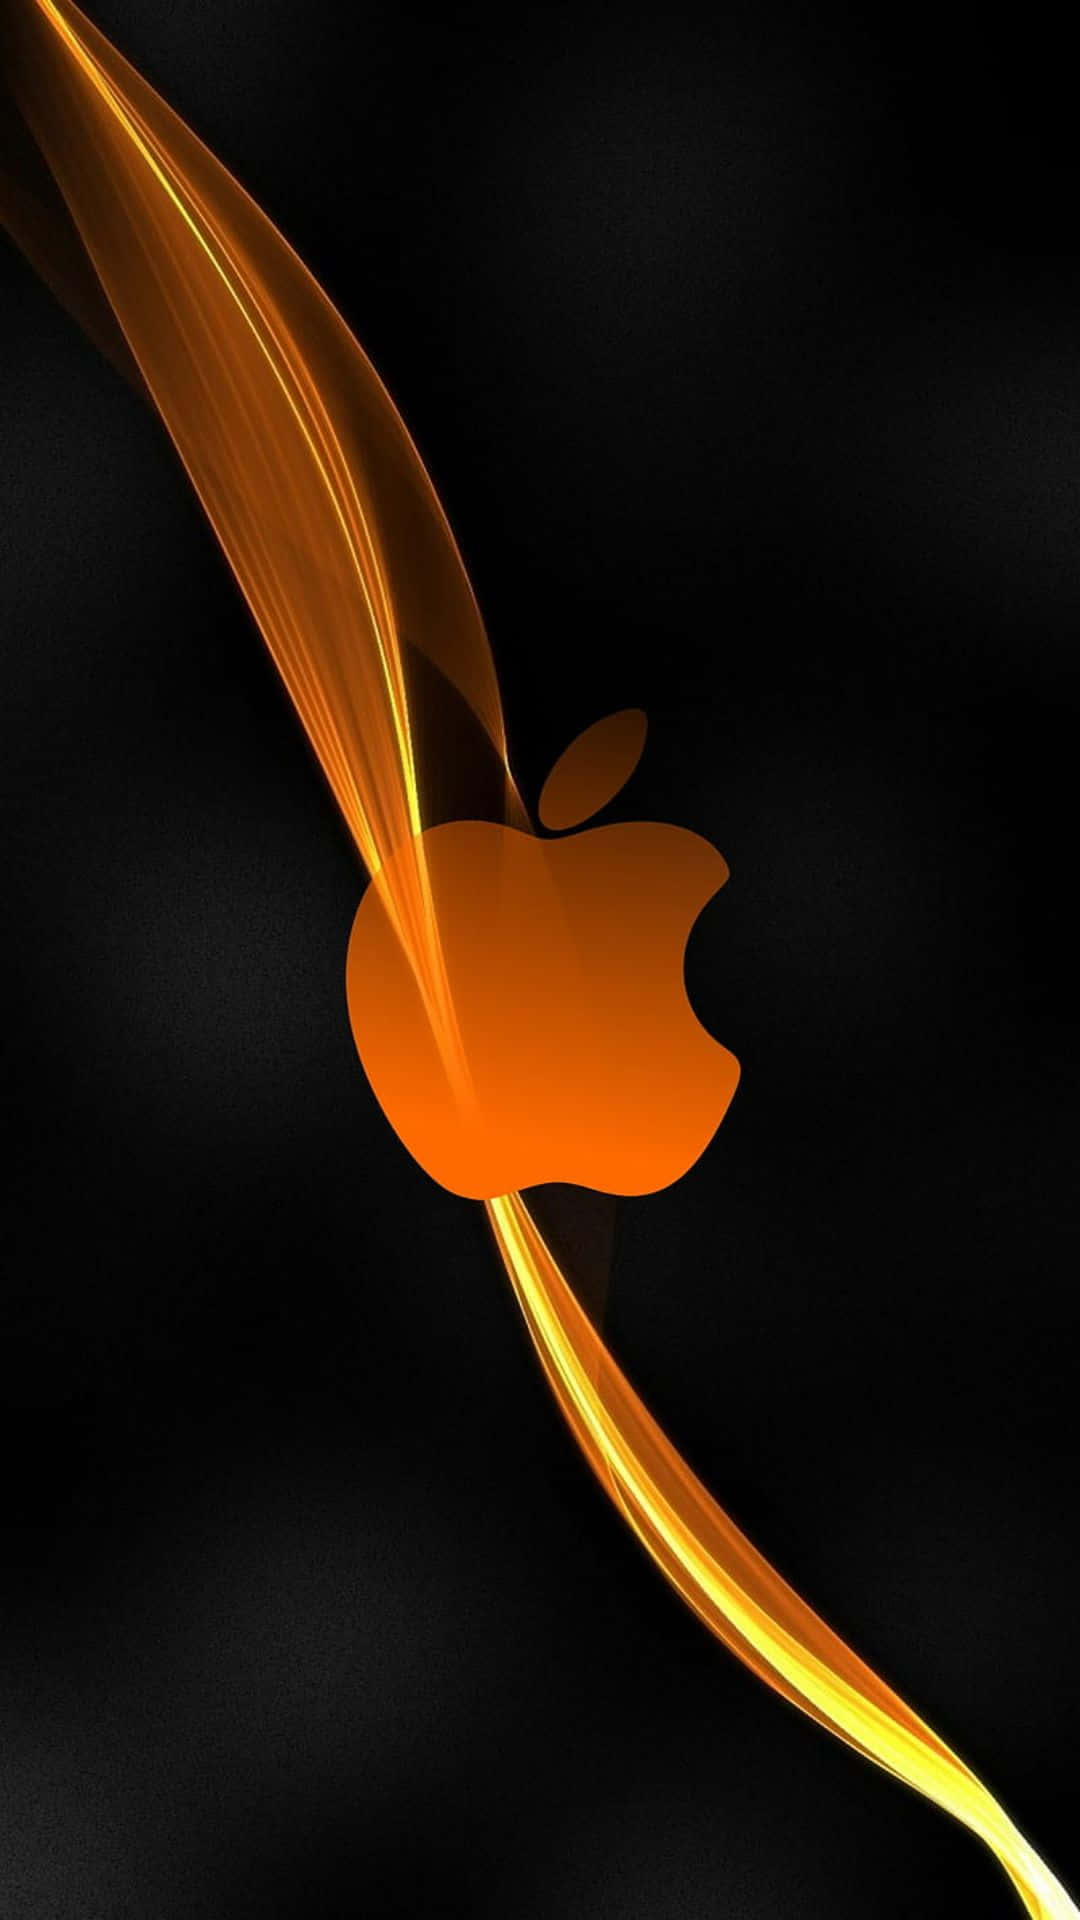 A gorgeous and colorful 4K Apple logo Wallpaper